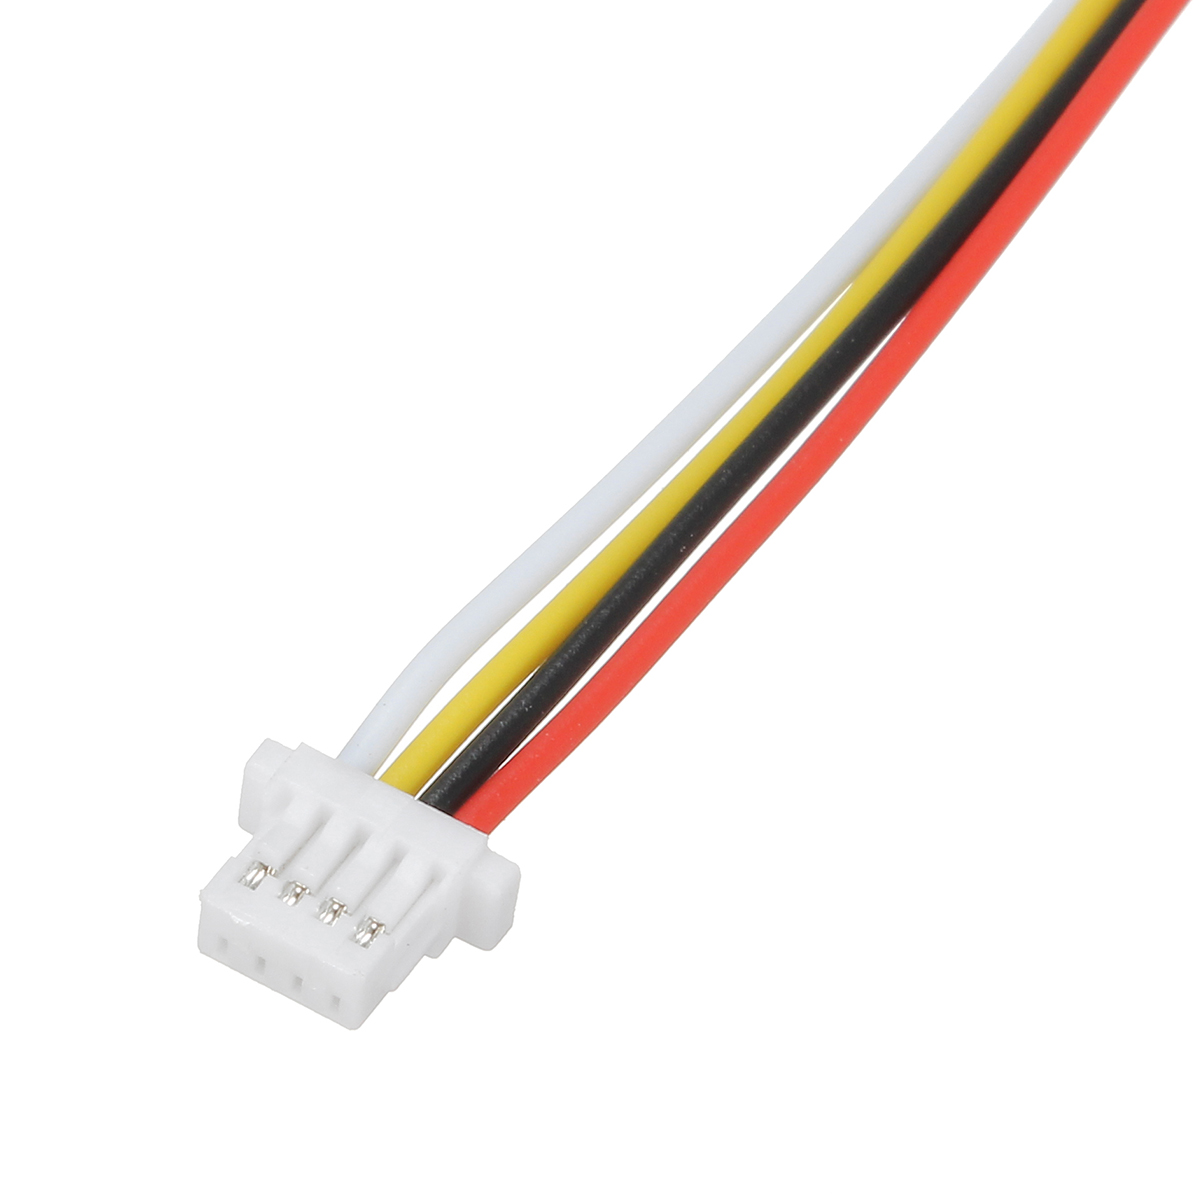 Find Excellway 20Pcs Mini Micro JST 1 0mm SH 4 Pin Connector Plug With Wire Cables 300mm for Sale on Gipsybee.com with cryptocurrencies